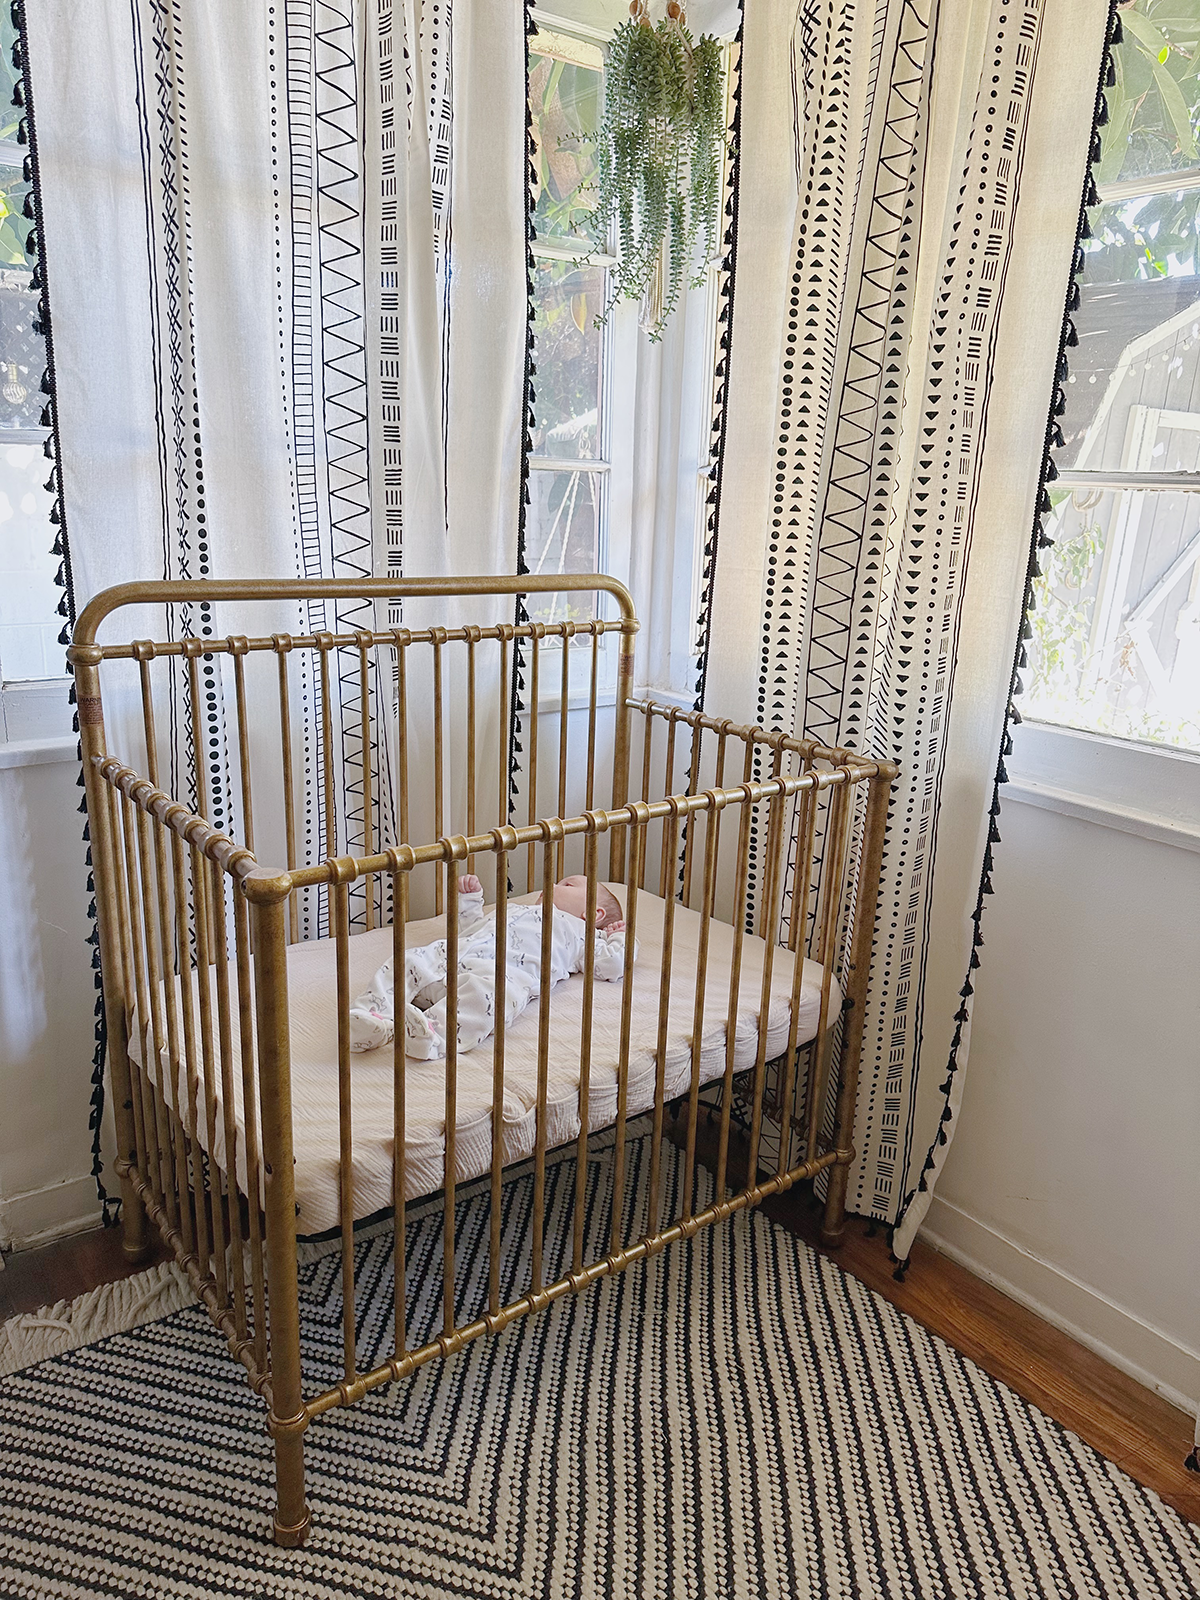 A mini crib that converts into a toddler bed